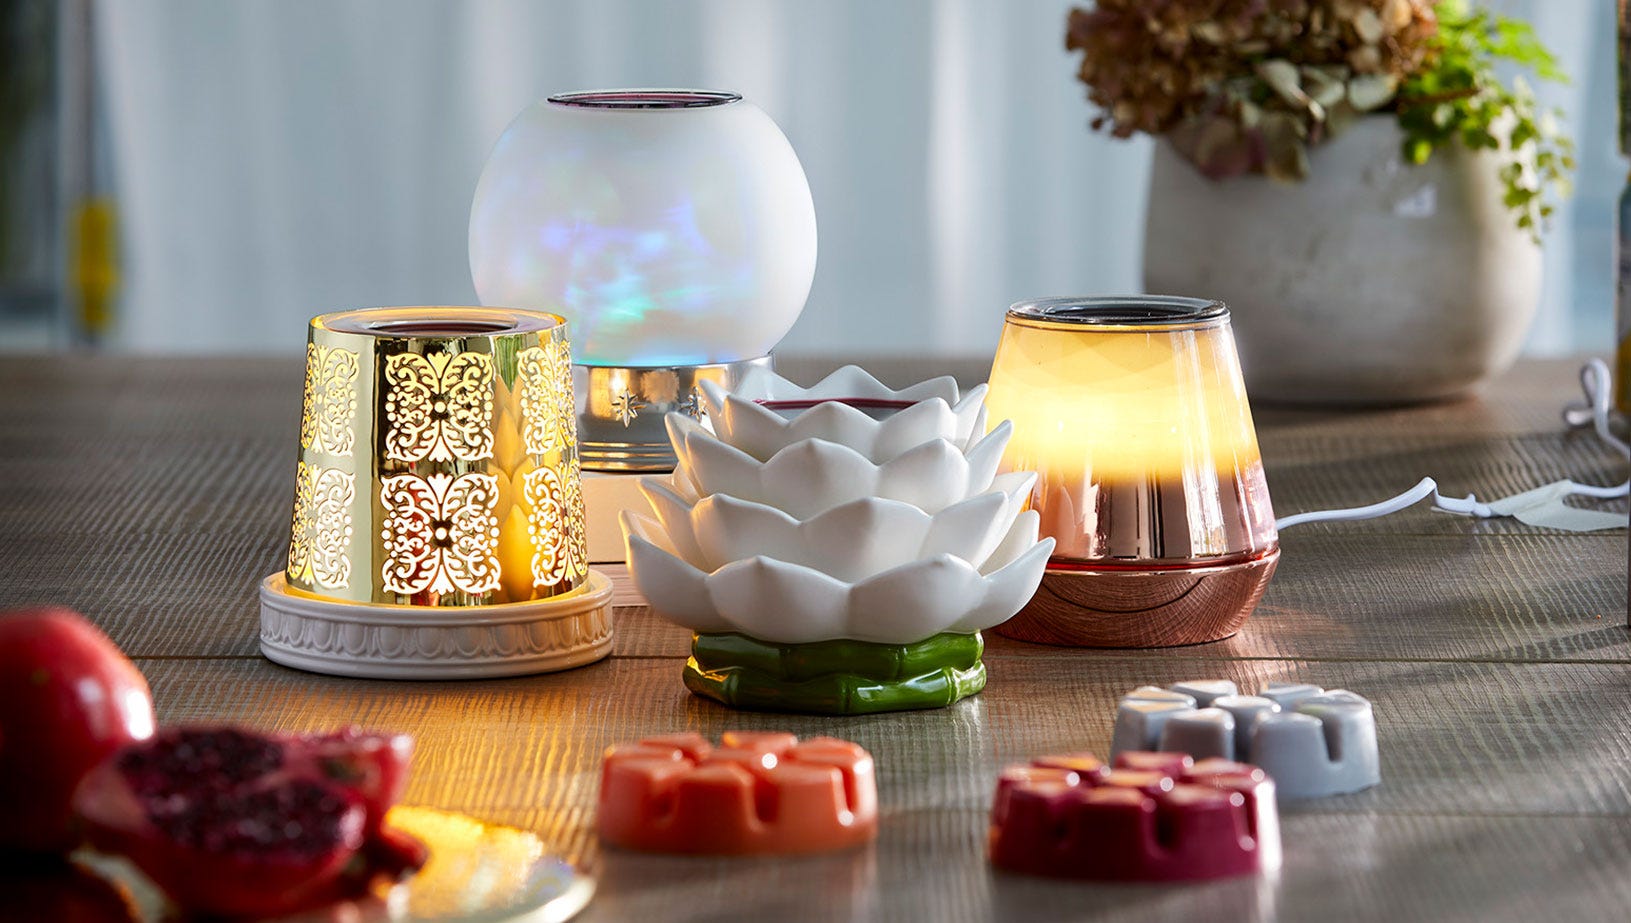 A variety of ScentGlow Warmers on a table